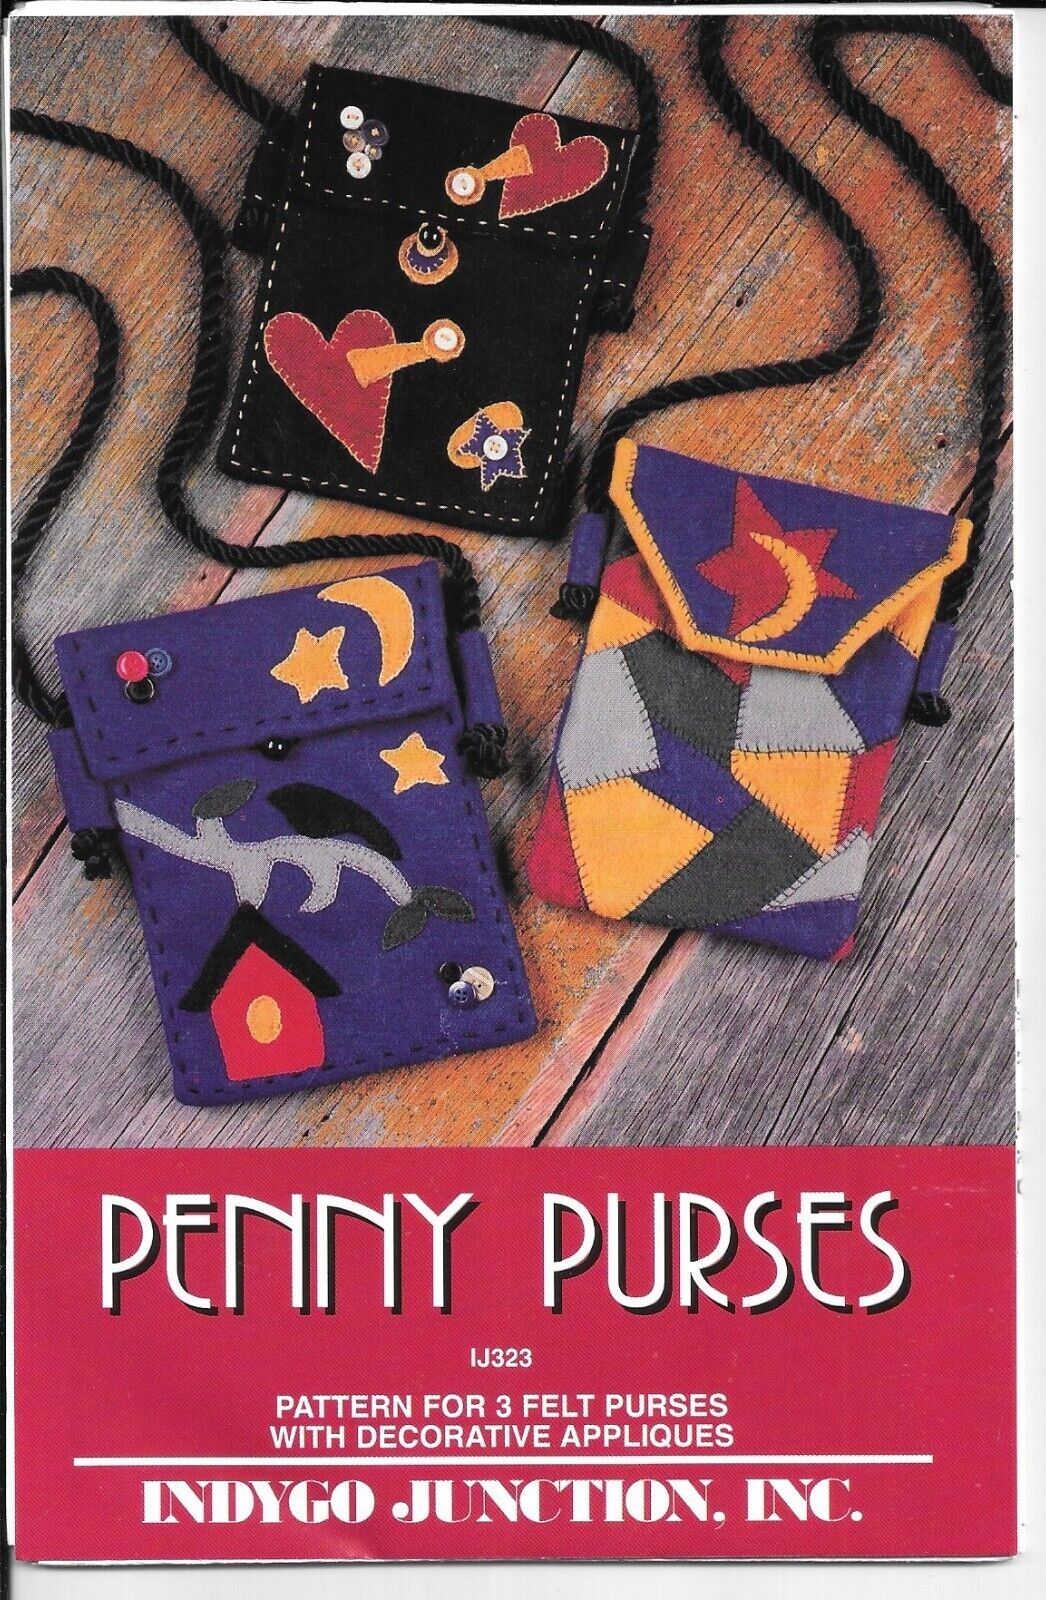 INDYGO JUNCTIONS IJ323 PENNY PURSES Vintage Sewing Pattern for 3 Felt Purses